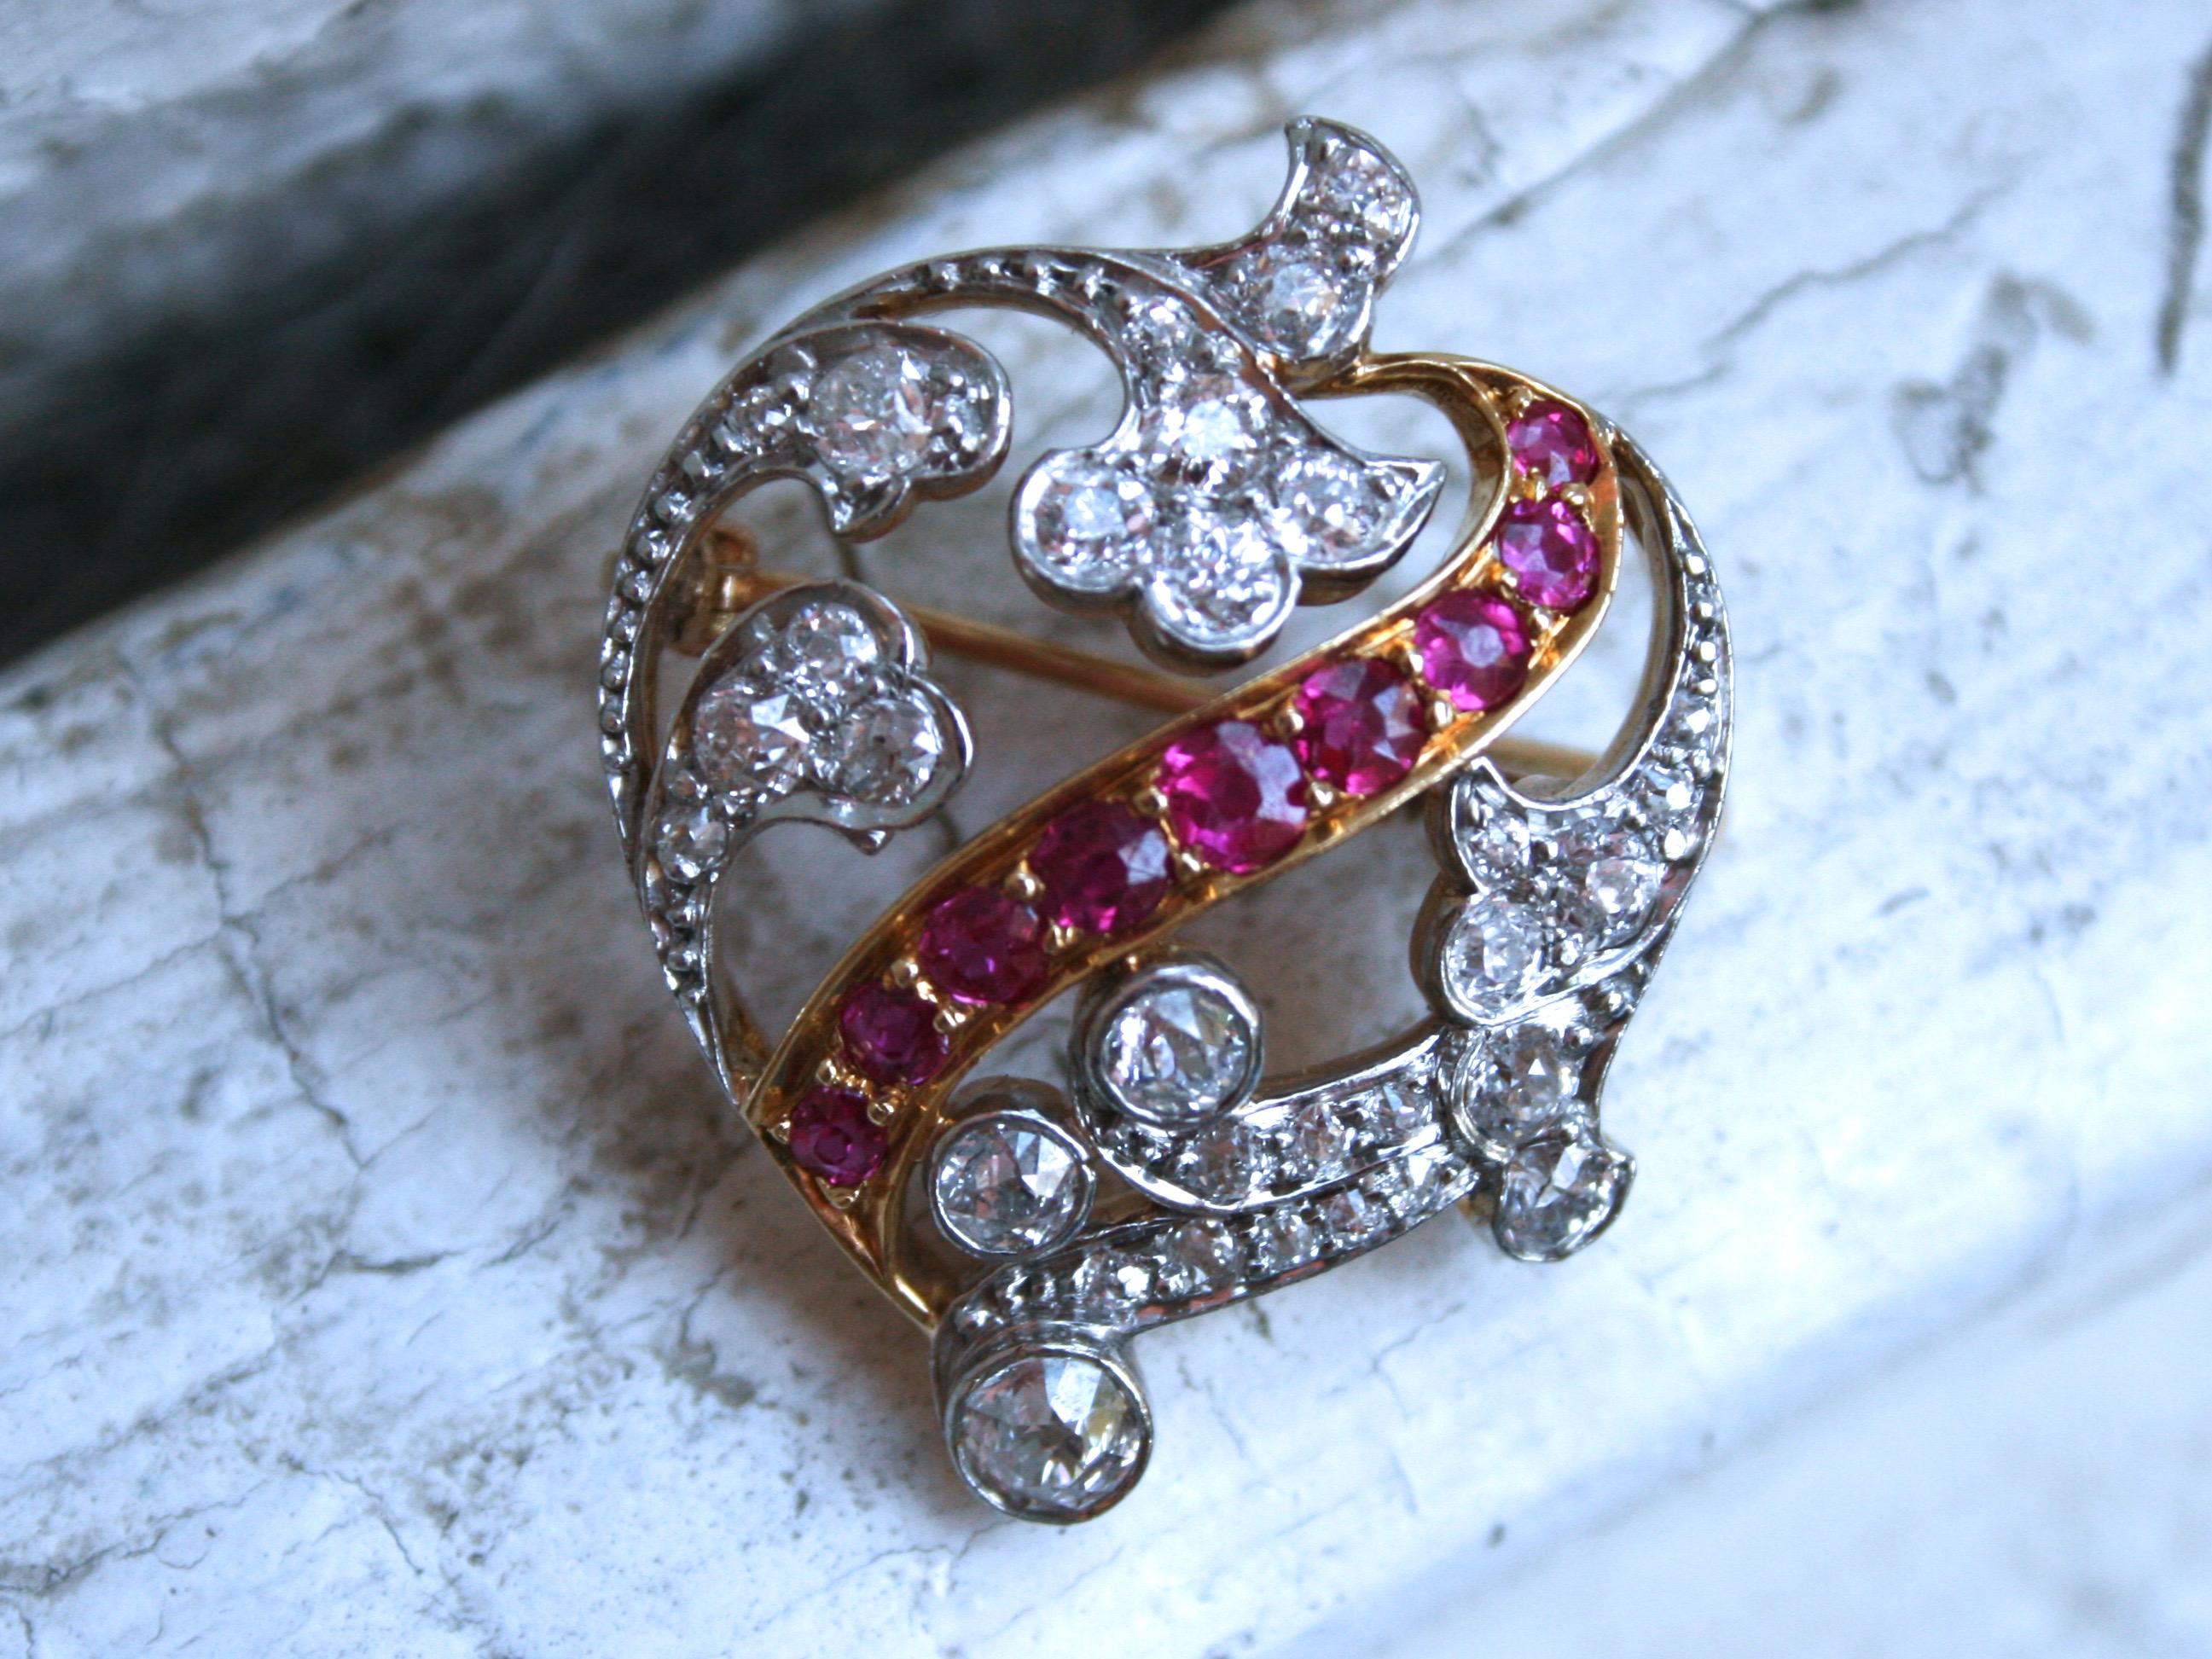  I LOVE this Gorgeous Antique 18K Yellow Gold/ Platinum Diamond and Ruby Heart Pin/ Brooch/ Pendant - this one is definitely a very special collectors piece! 

Crafted in 18K Yellow Gold, and topped in Platinum, the piece is a wonderful open worked